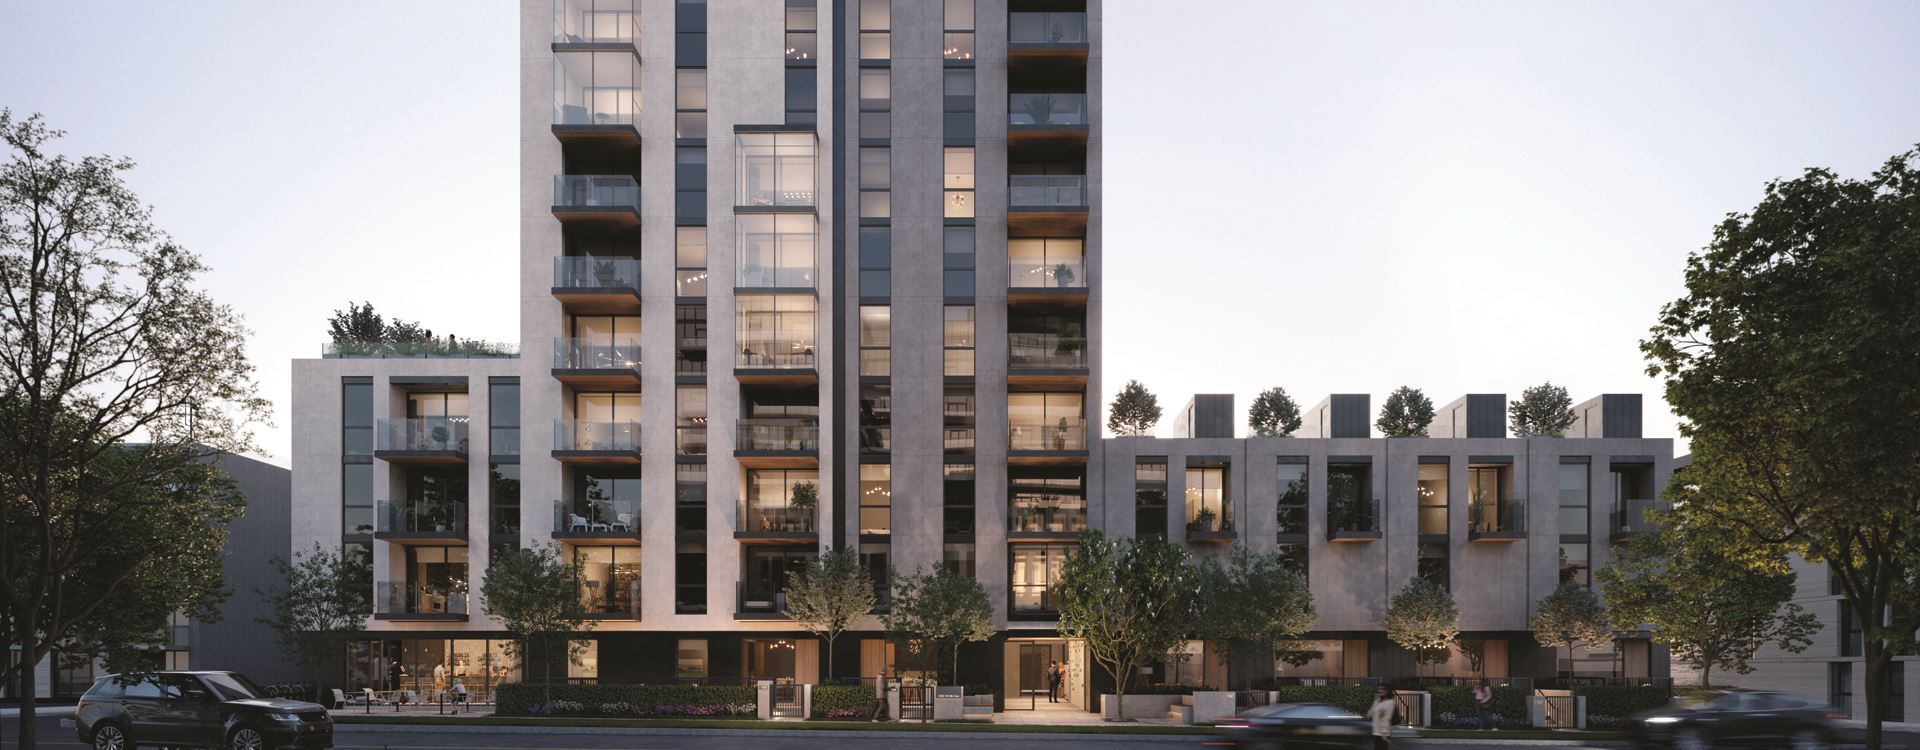 Presale condominiums and townhomes coming soon to this ideal South Granville location.